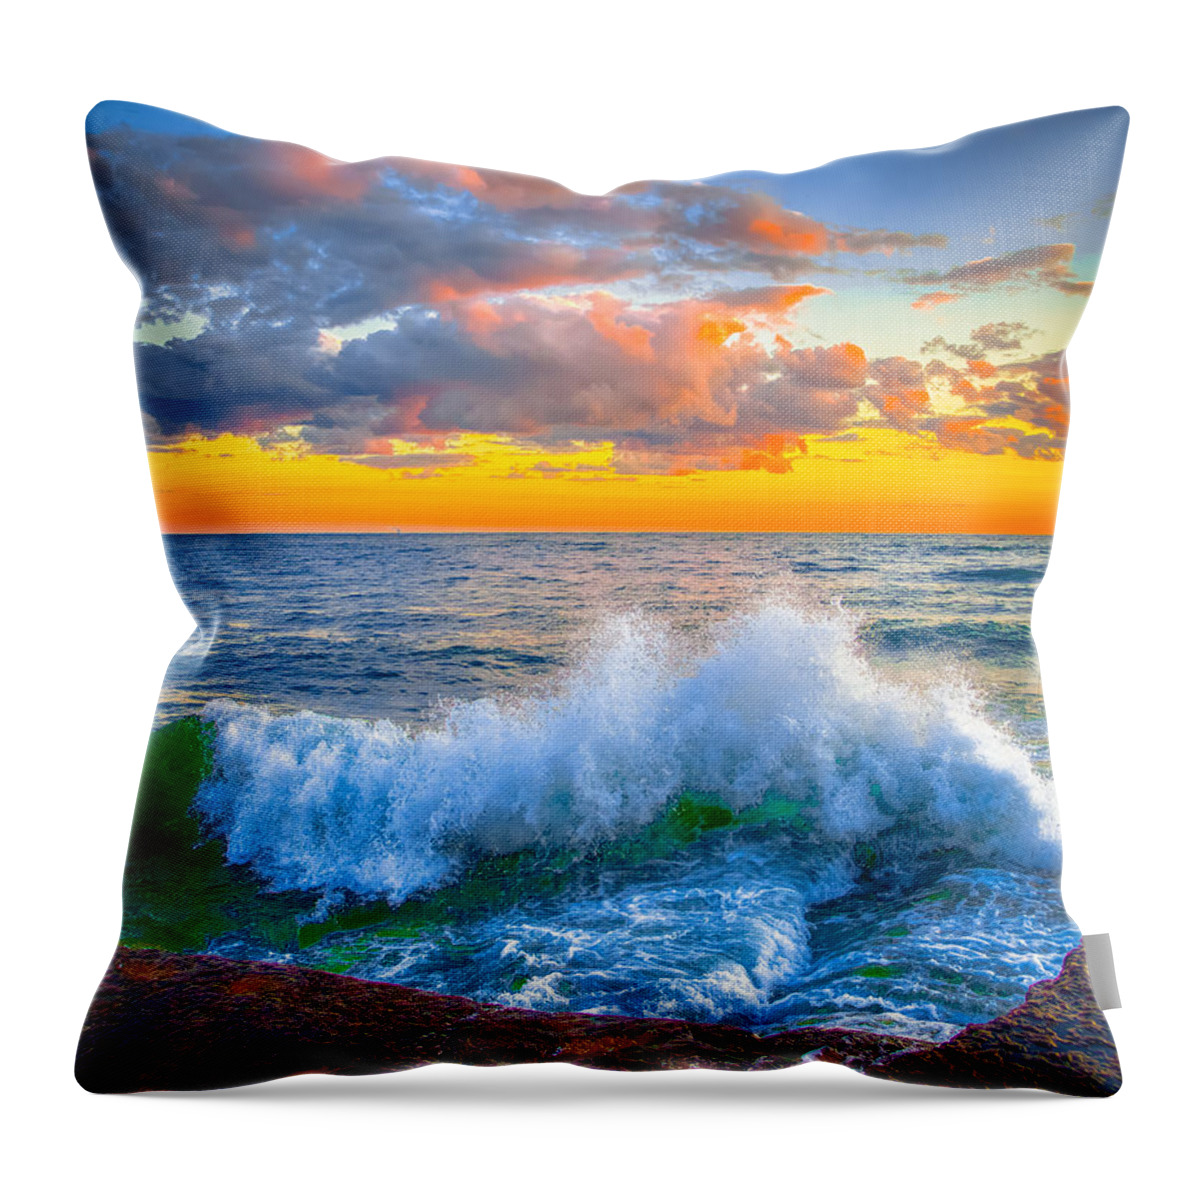 Lake Ontario Throw Pillow featuring the photograph Moonlight #1 by Fred J Lord